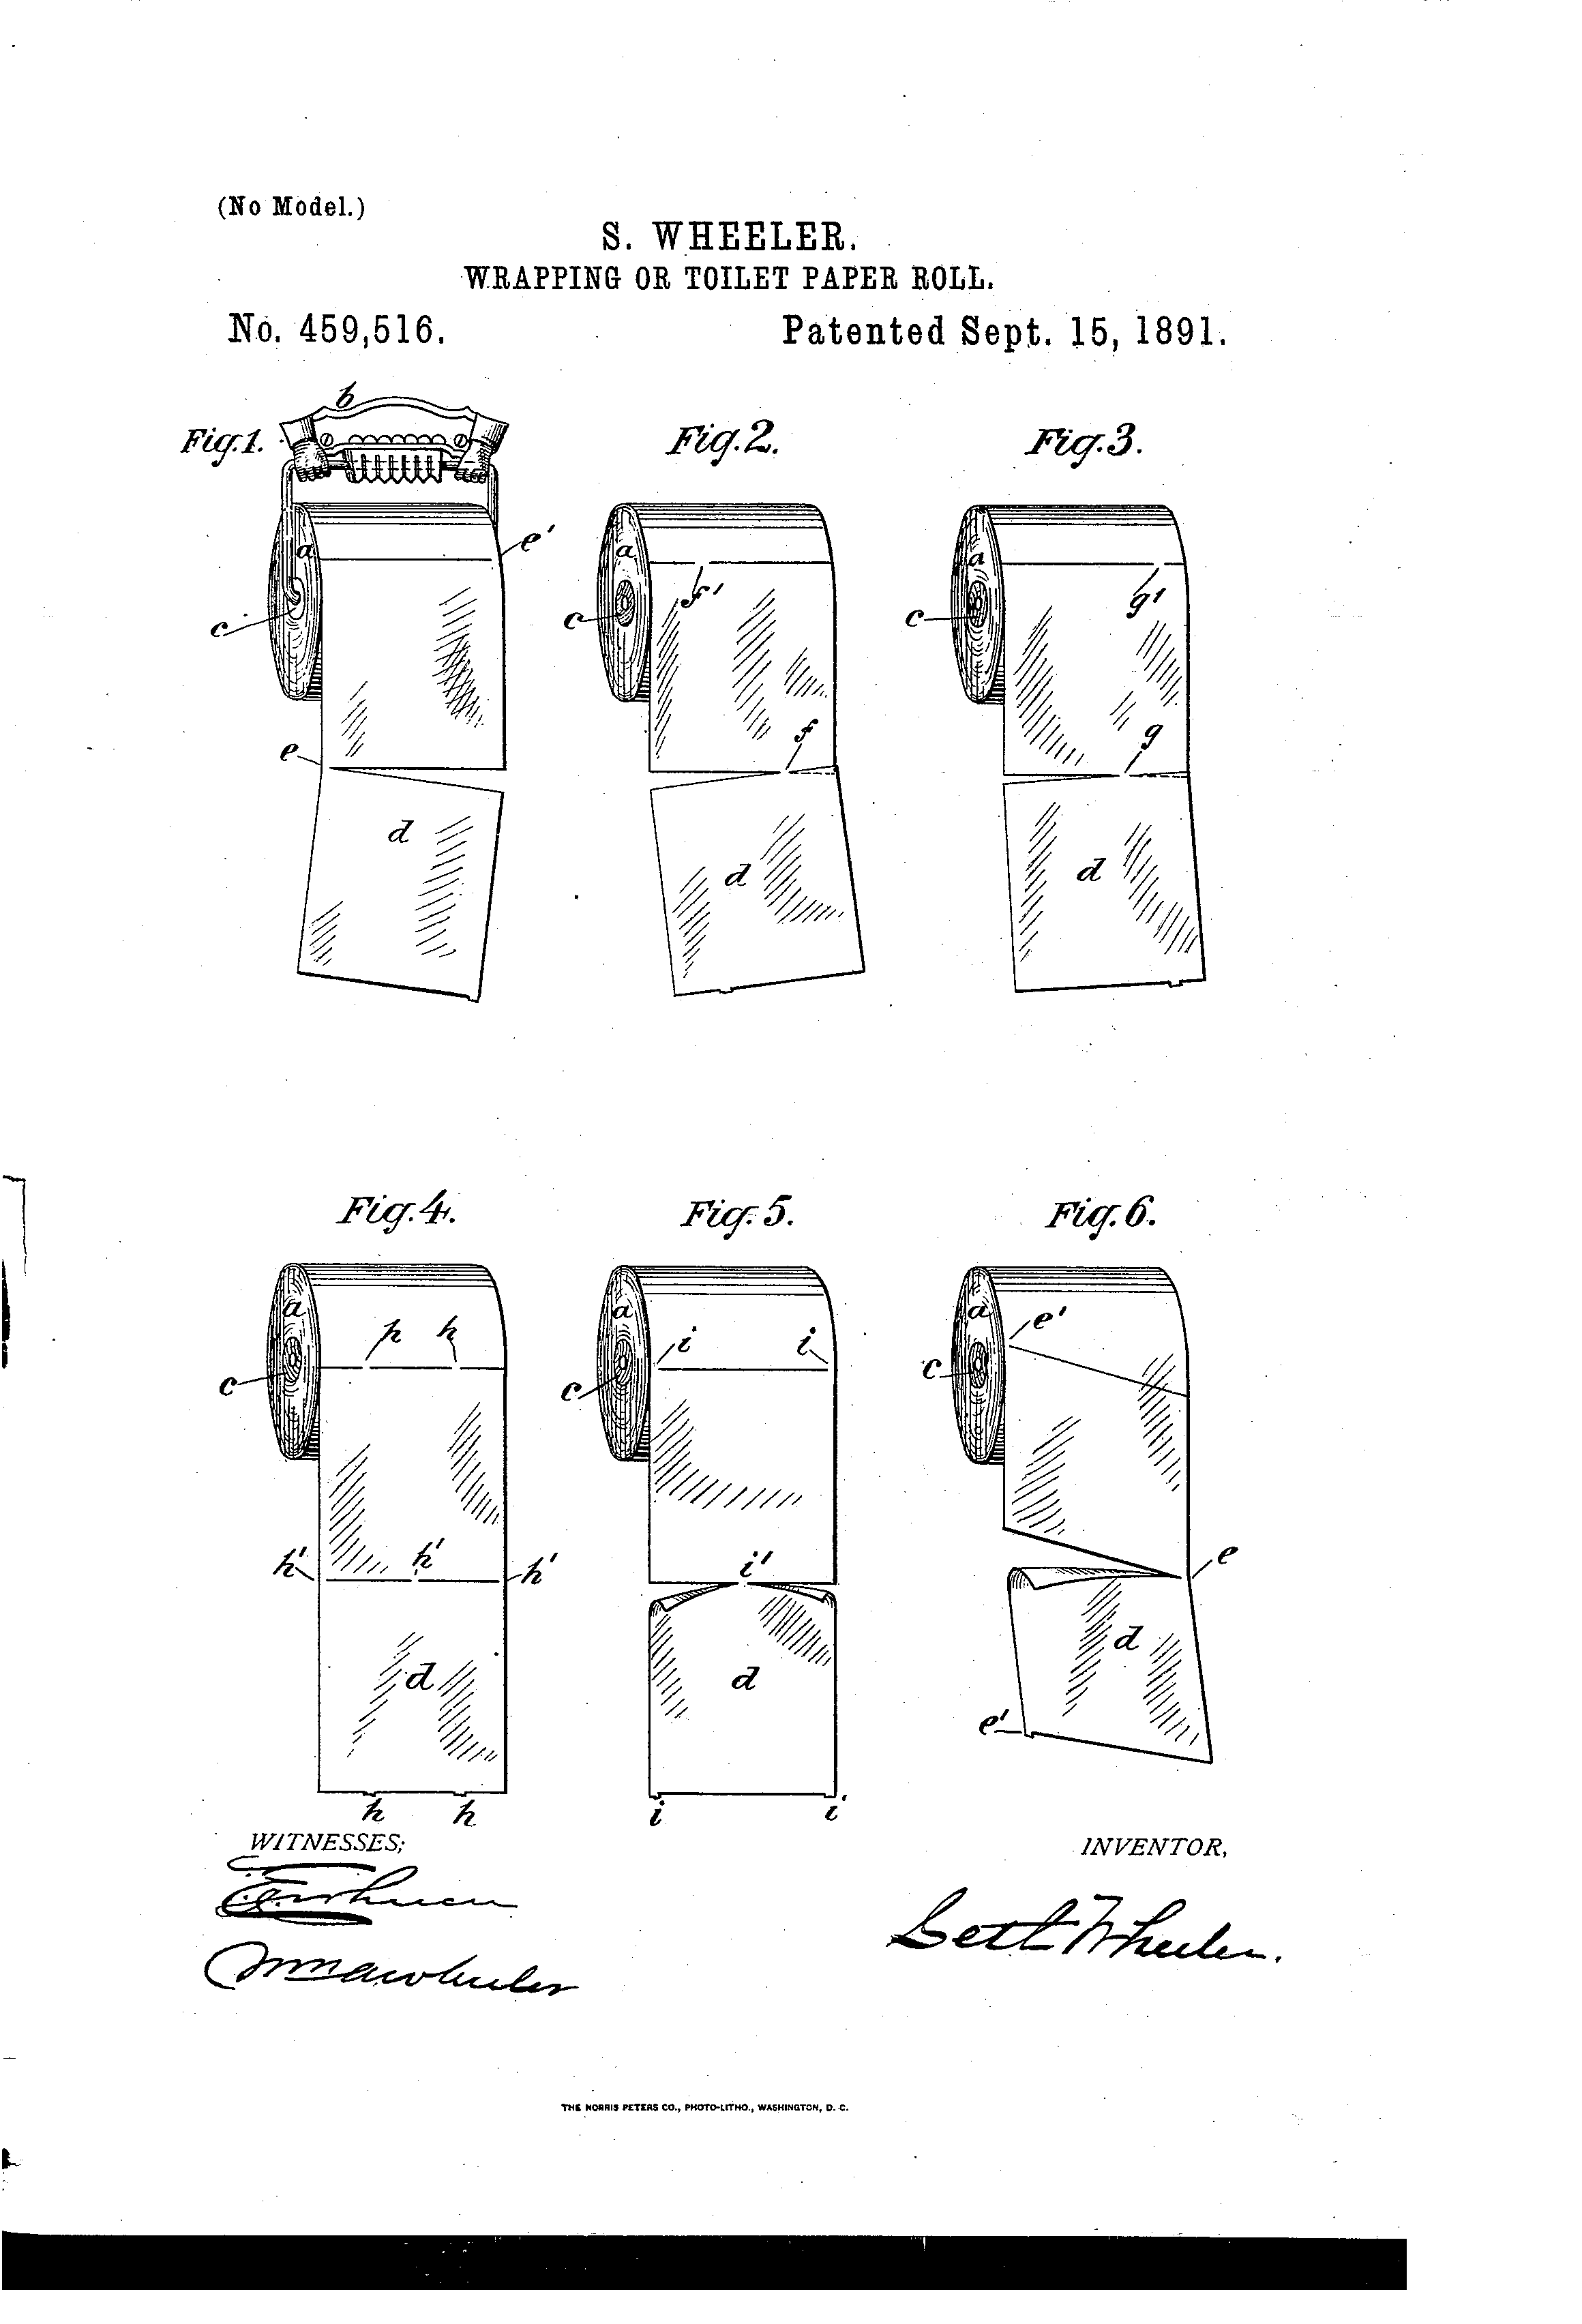 Toilet paper roll US patent #459,516.